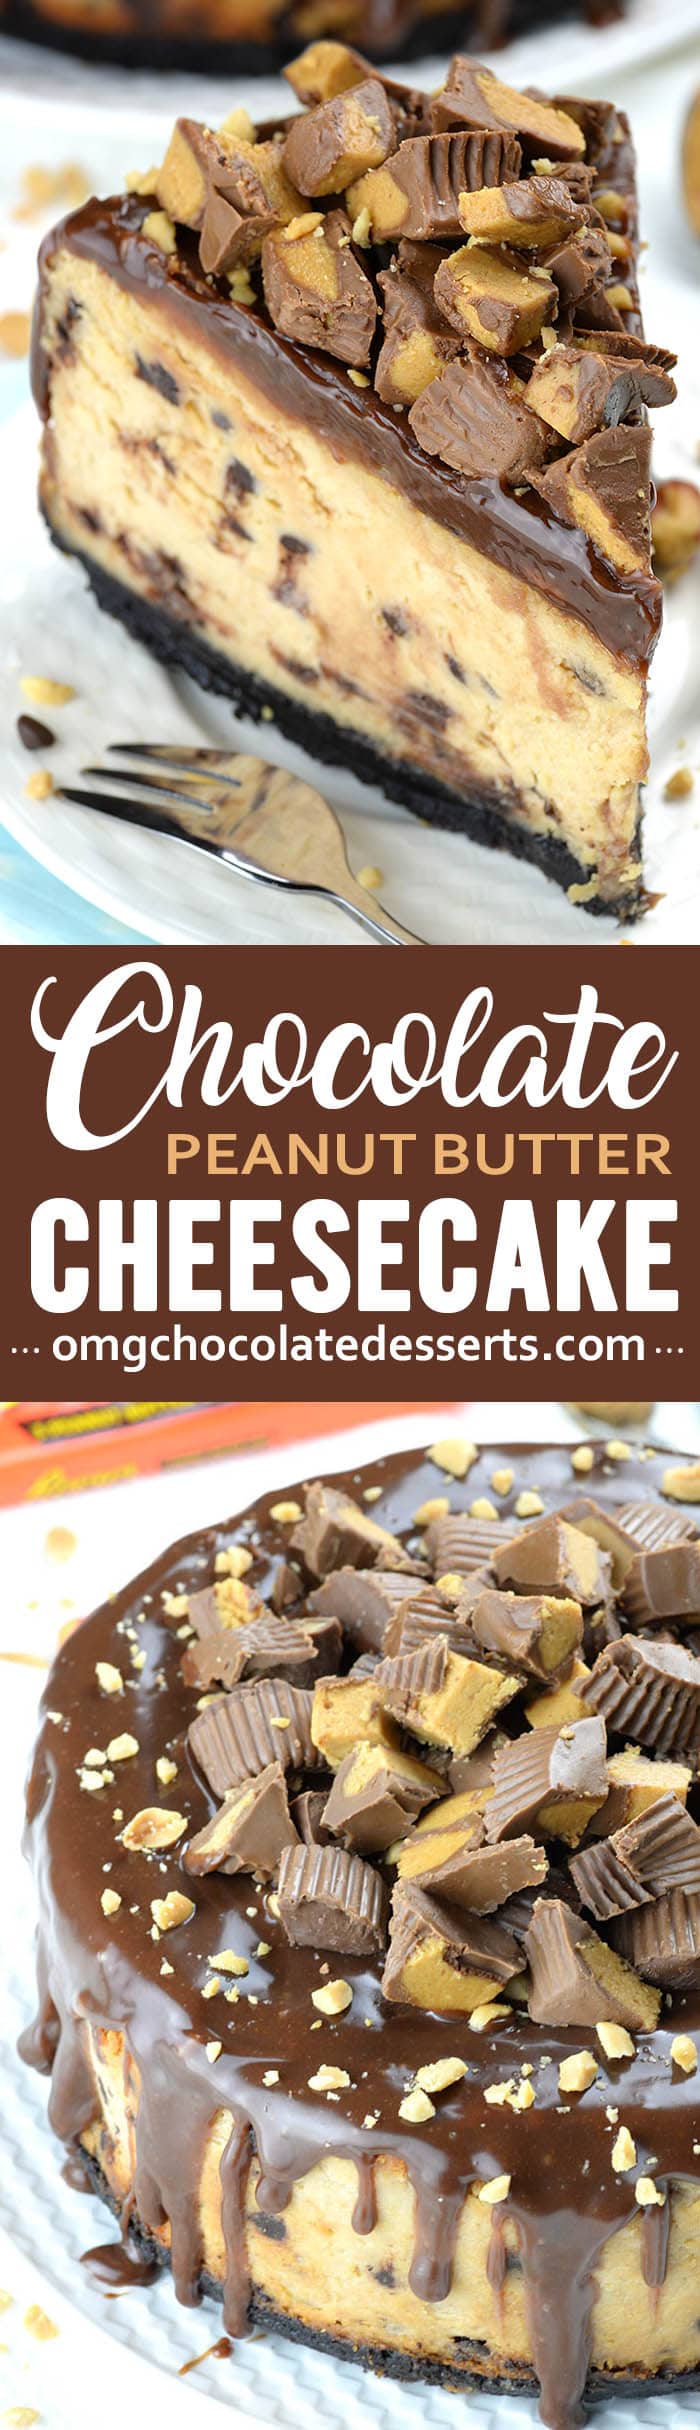 Rich and decadent, this Reese's Chocolate Peanut Butter Cheesecake Recipe is filled with chocolate and peanut butter and it will satisfy your peanut butter and chocolate cravings!